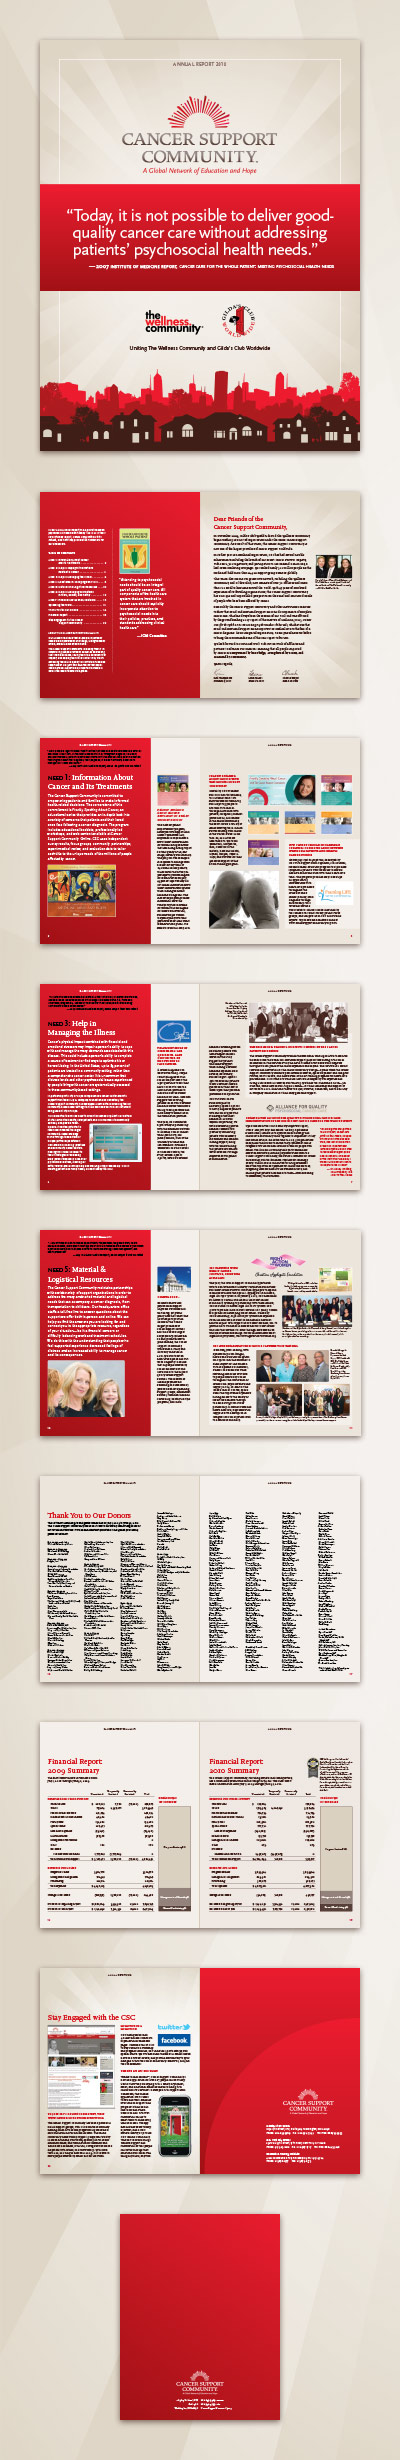 Screen shot capturing all pages of the Cancer support community annual report